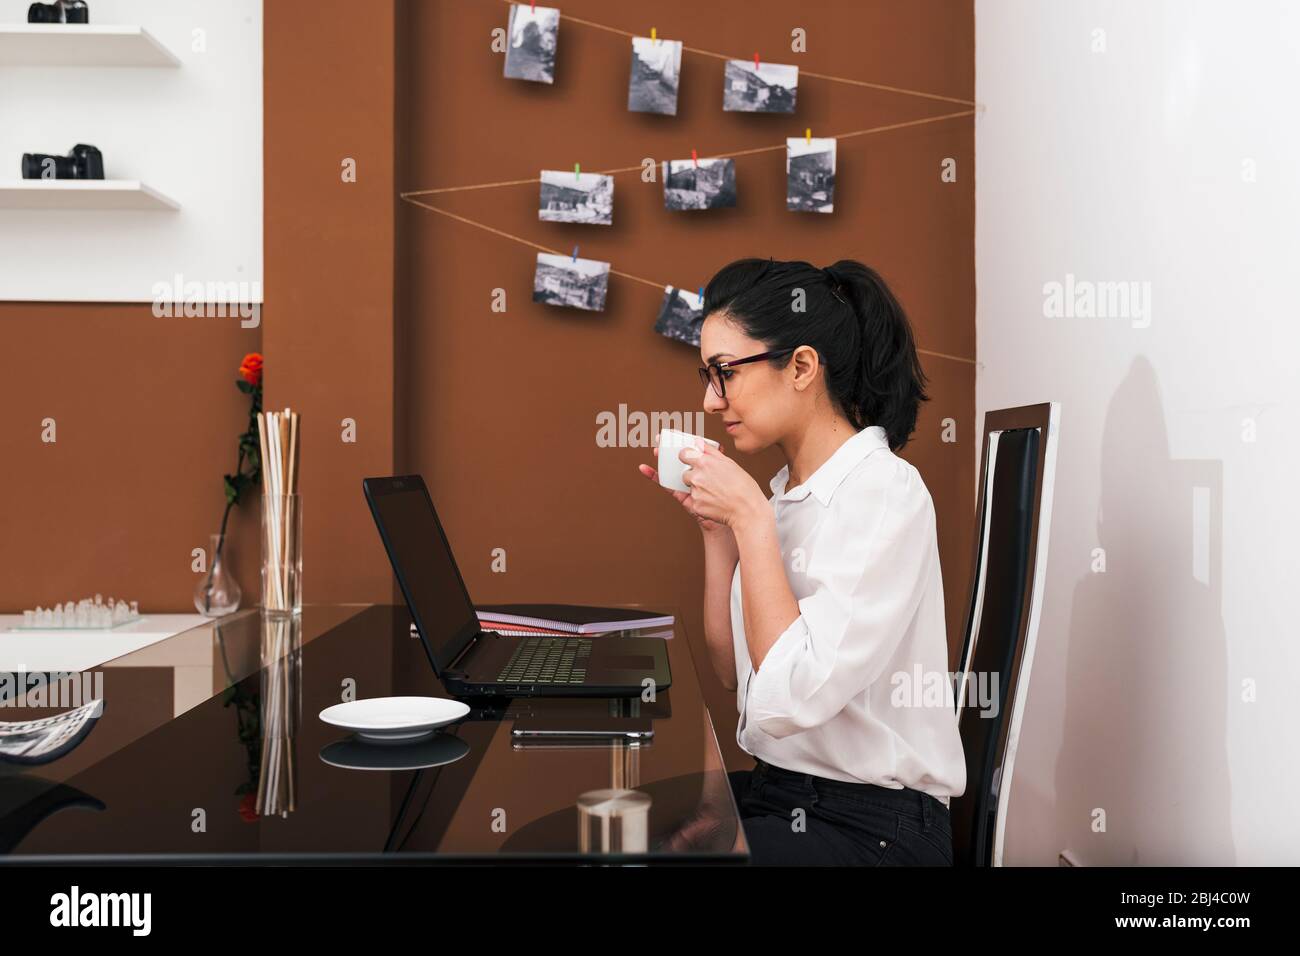 Young woman with glasses taking a coffee break while working in her makeshift home office. Work from home concept. Stock Photo